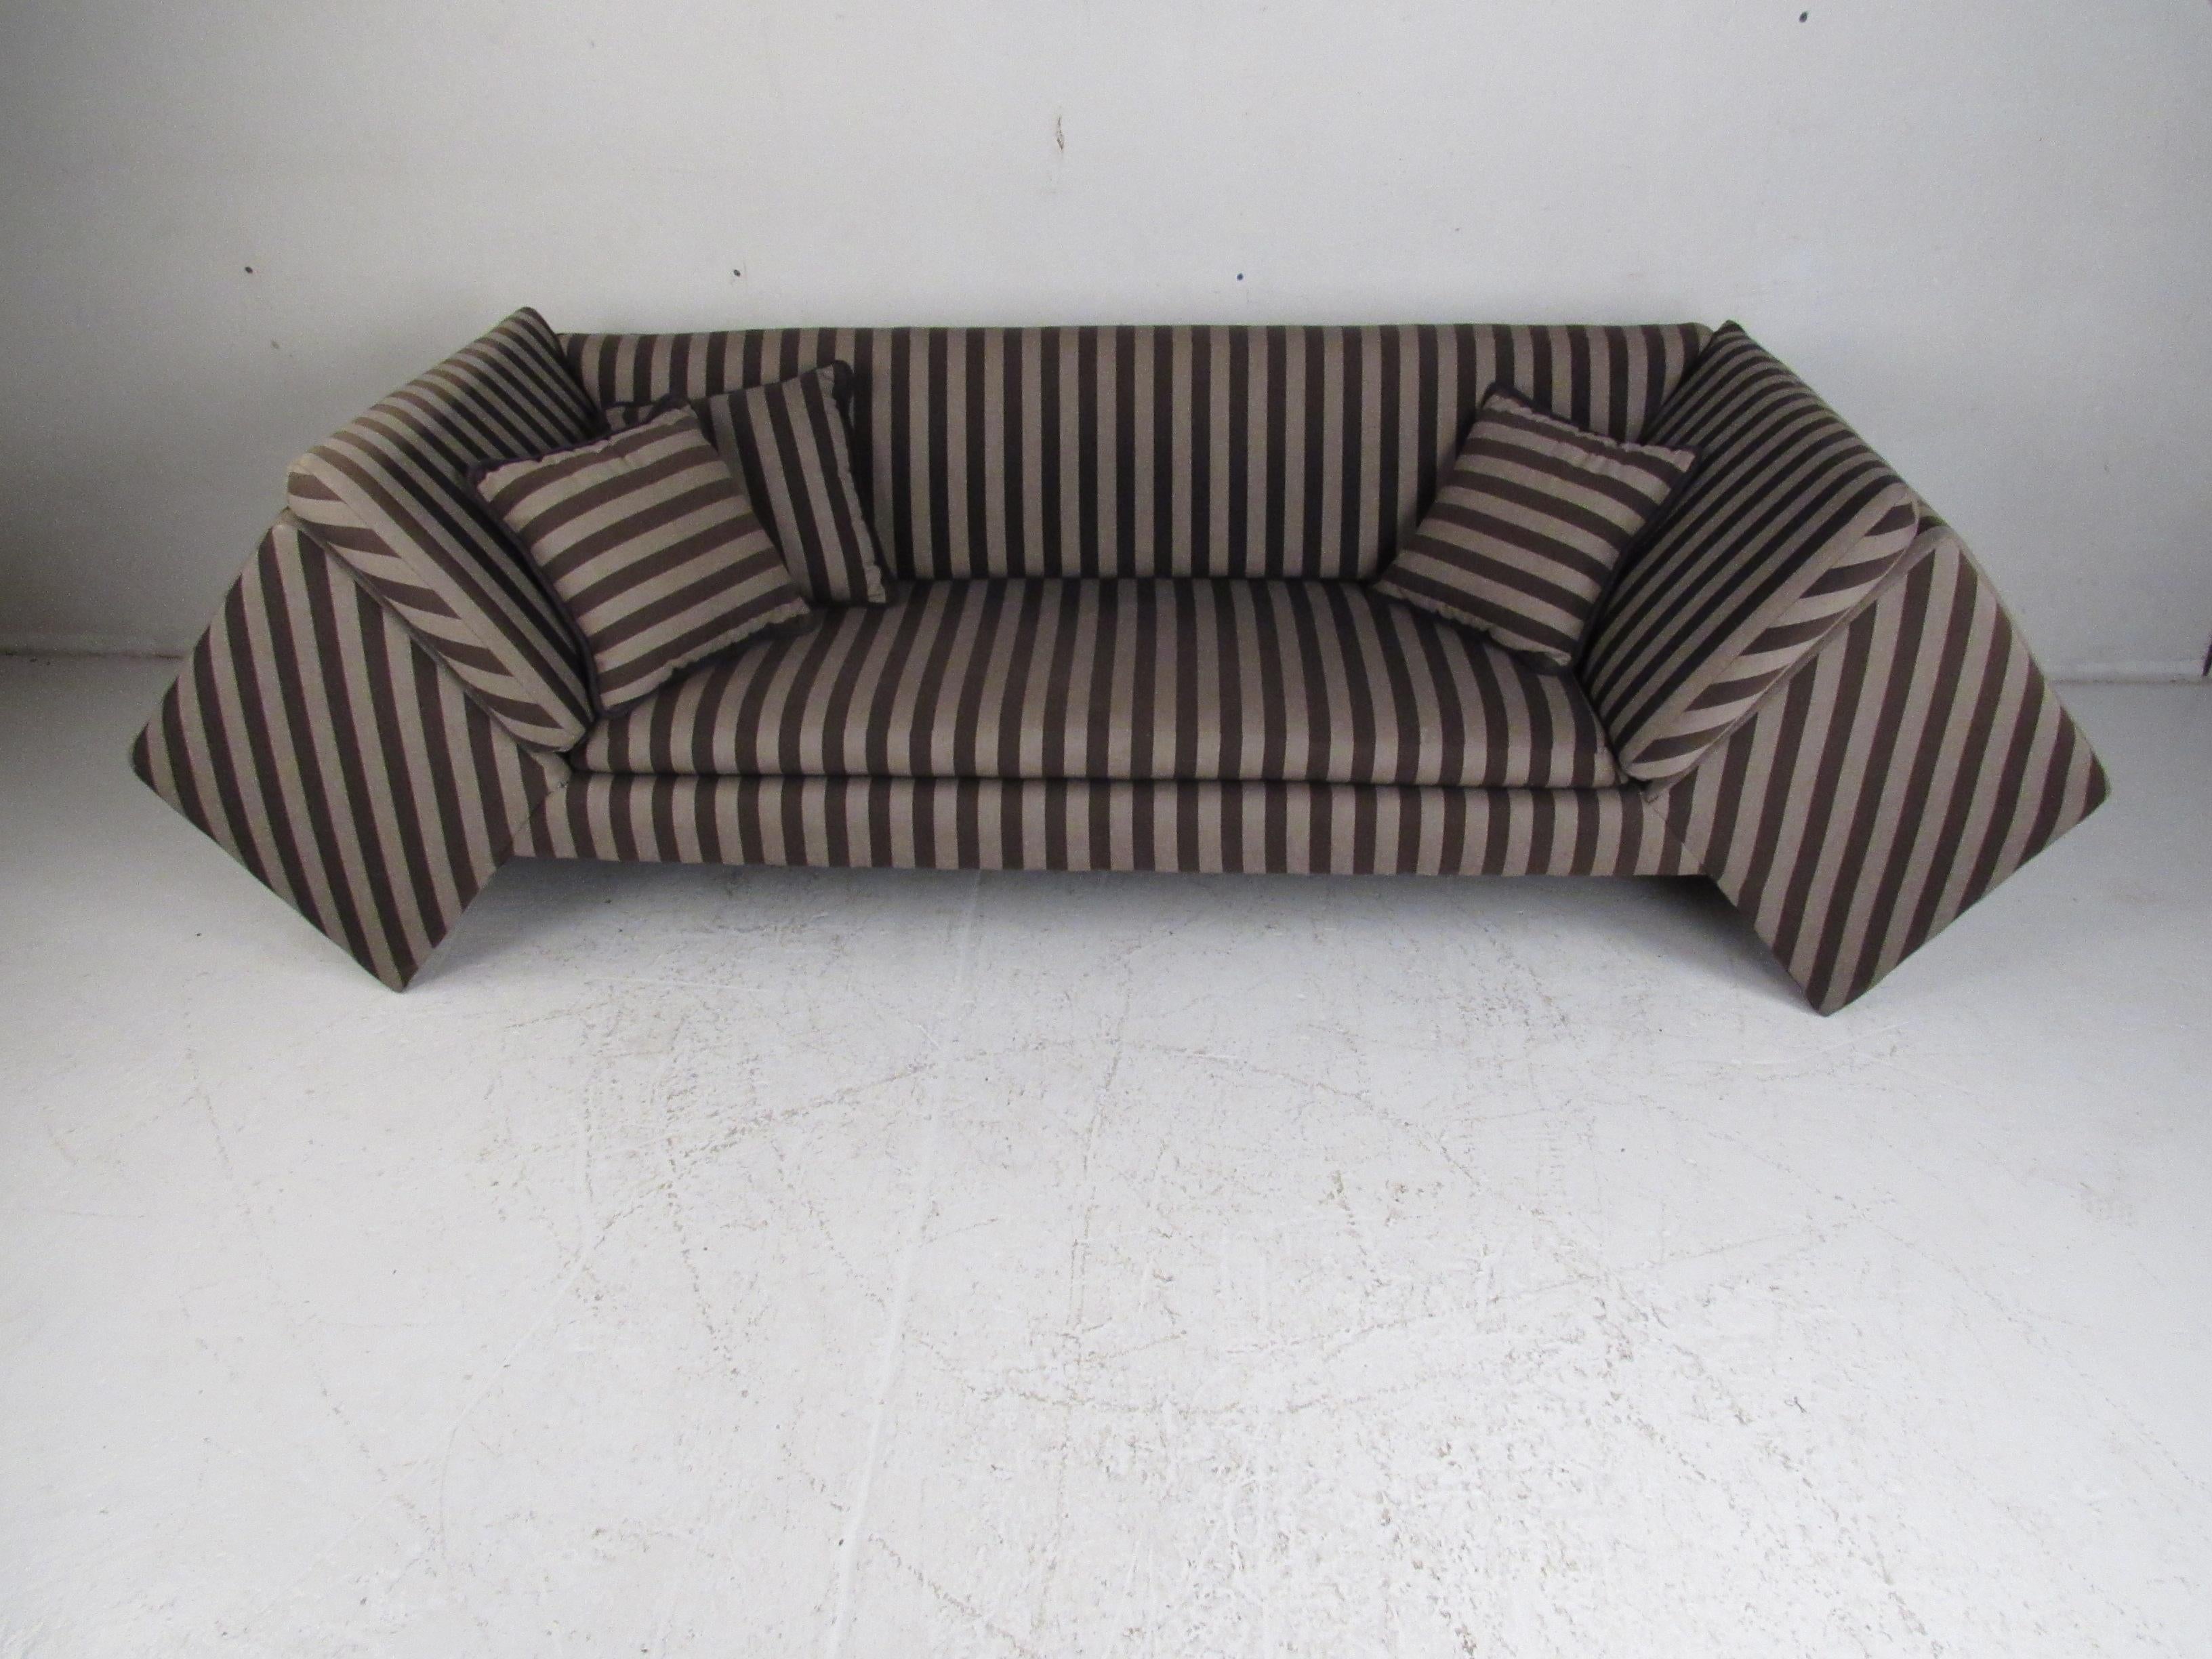 This stunning contemporary modern sofa boasts unusual diamond shaped sides, overstuffed cushions, and an elegant striped upholstery. An amazing piece with high armrests that angle outward and a bridge style design ensuring maximum comfort. A well